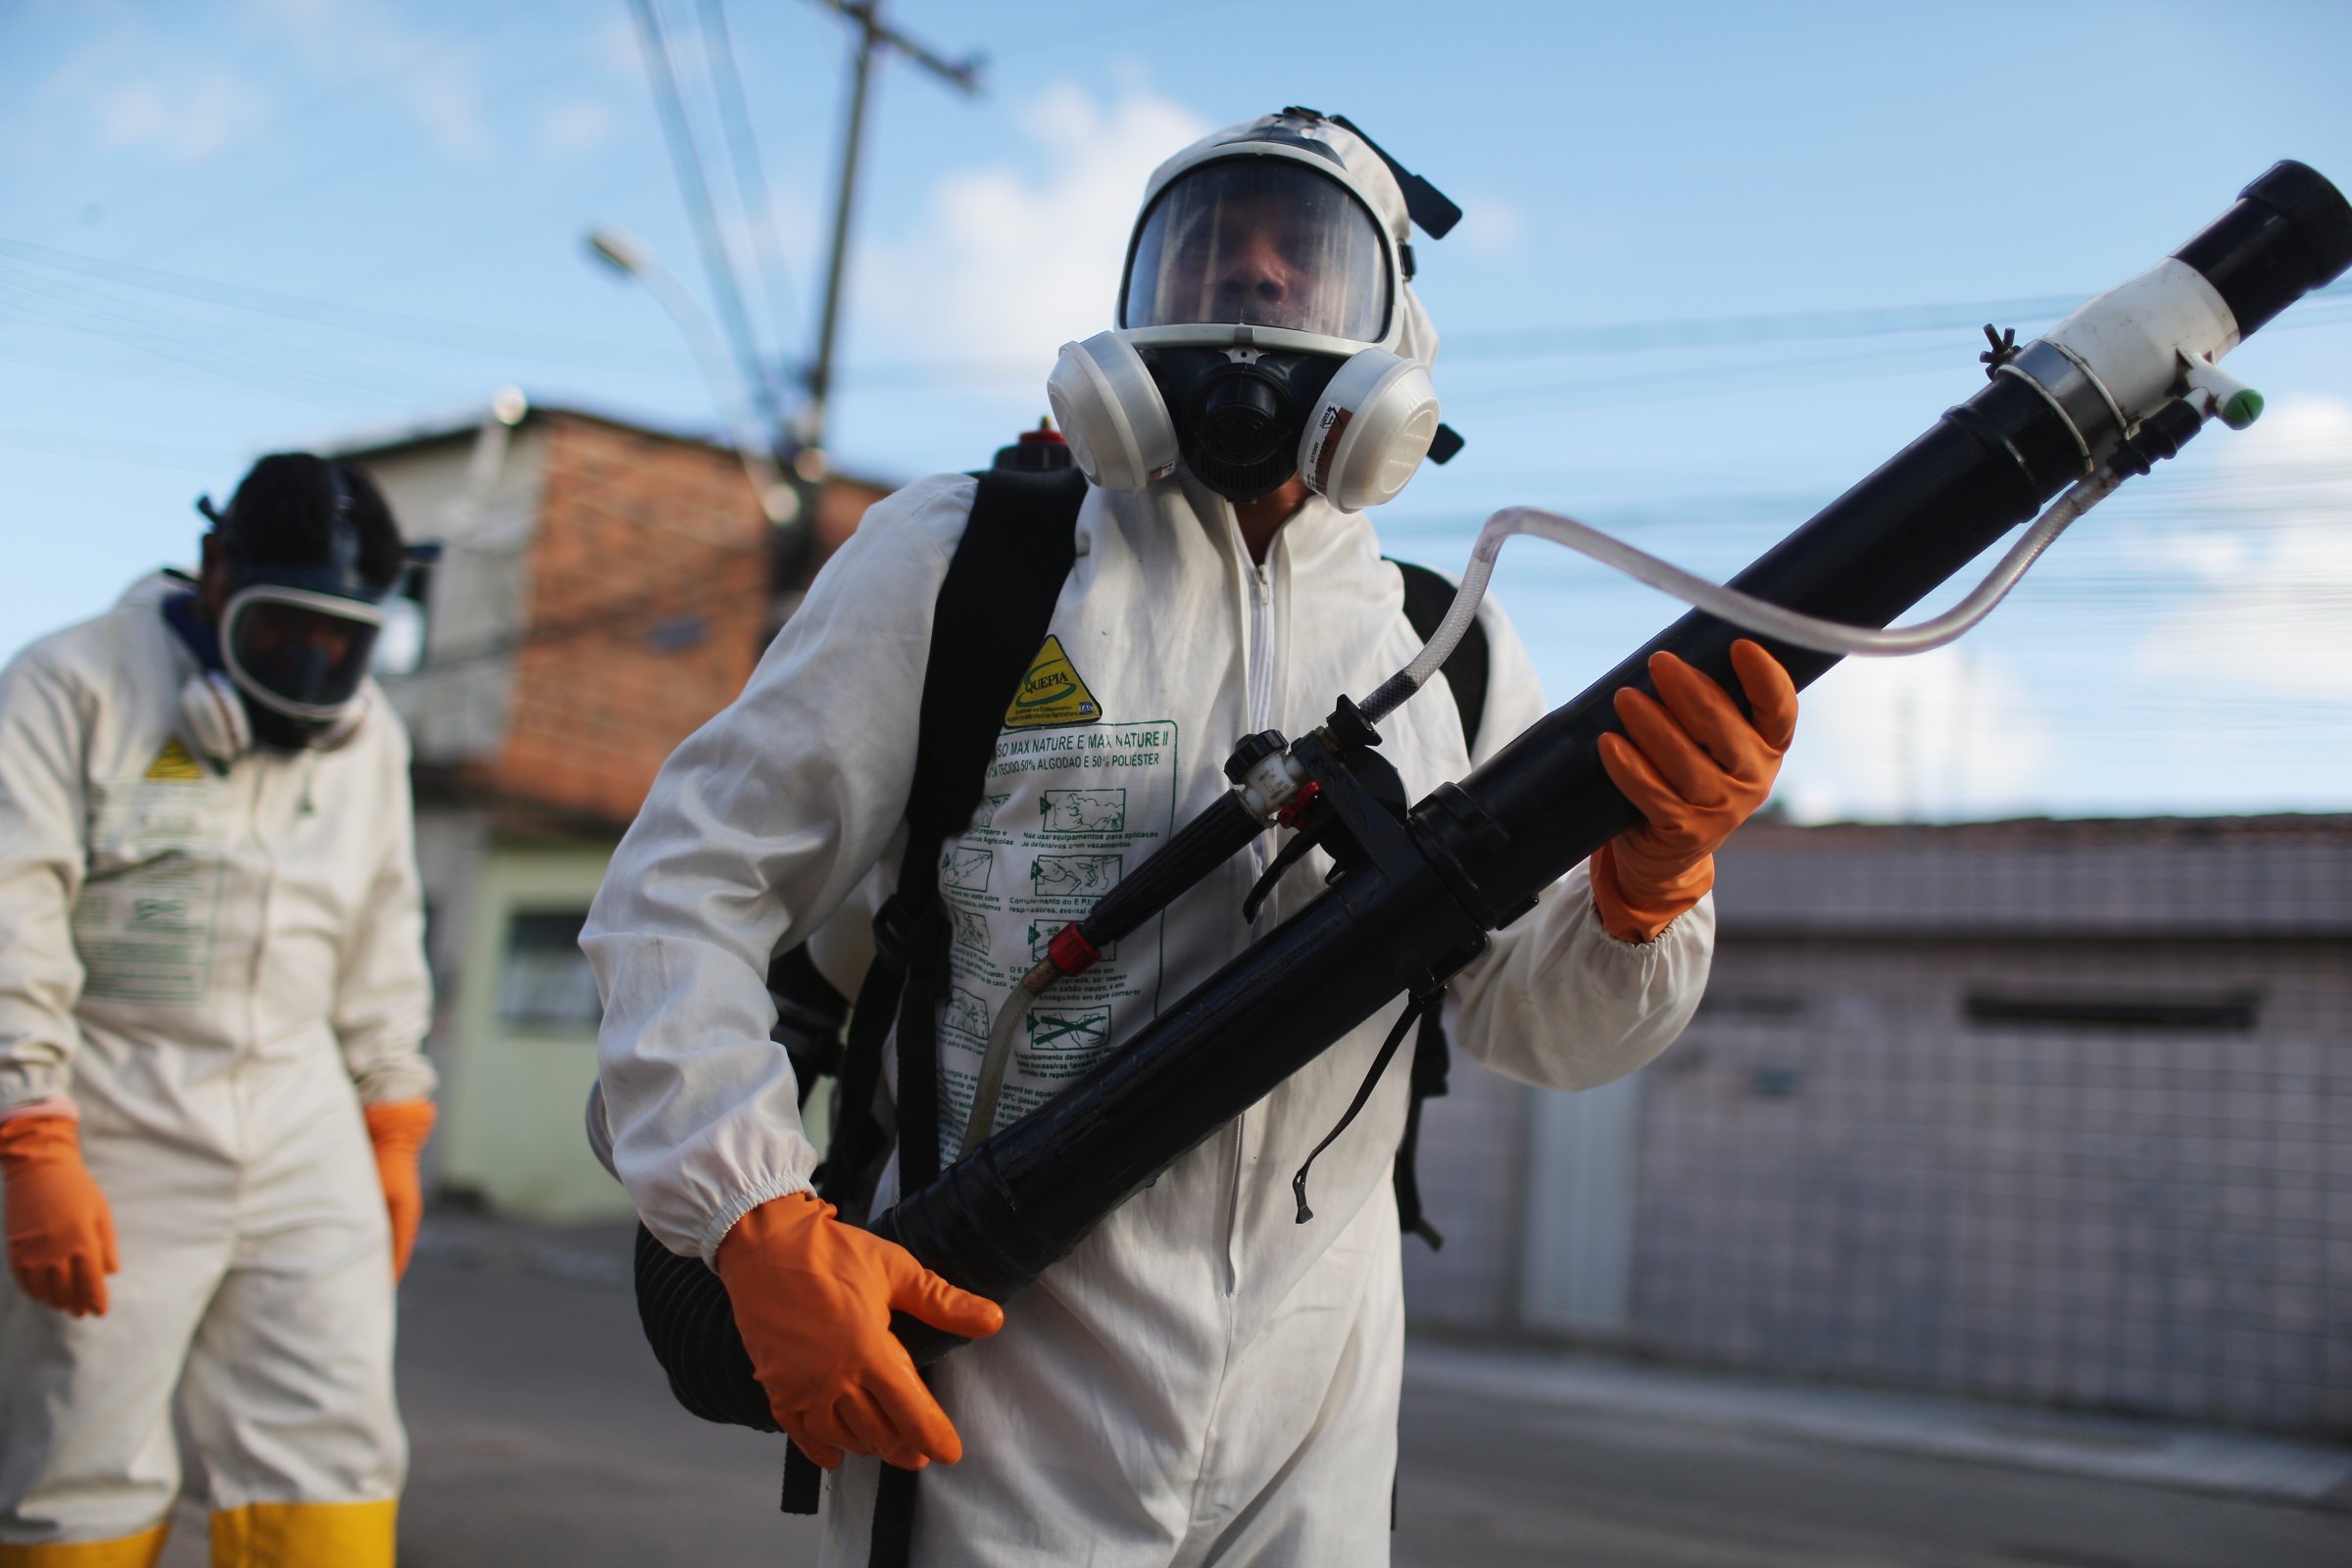 Health workers fumigate in an attempt to eradicate the mosquito which transmits the Zika virus on January 28, 2016 in Recife, Pernambuco state, Brazil.